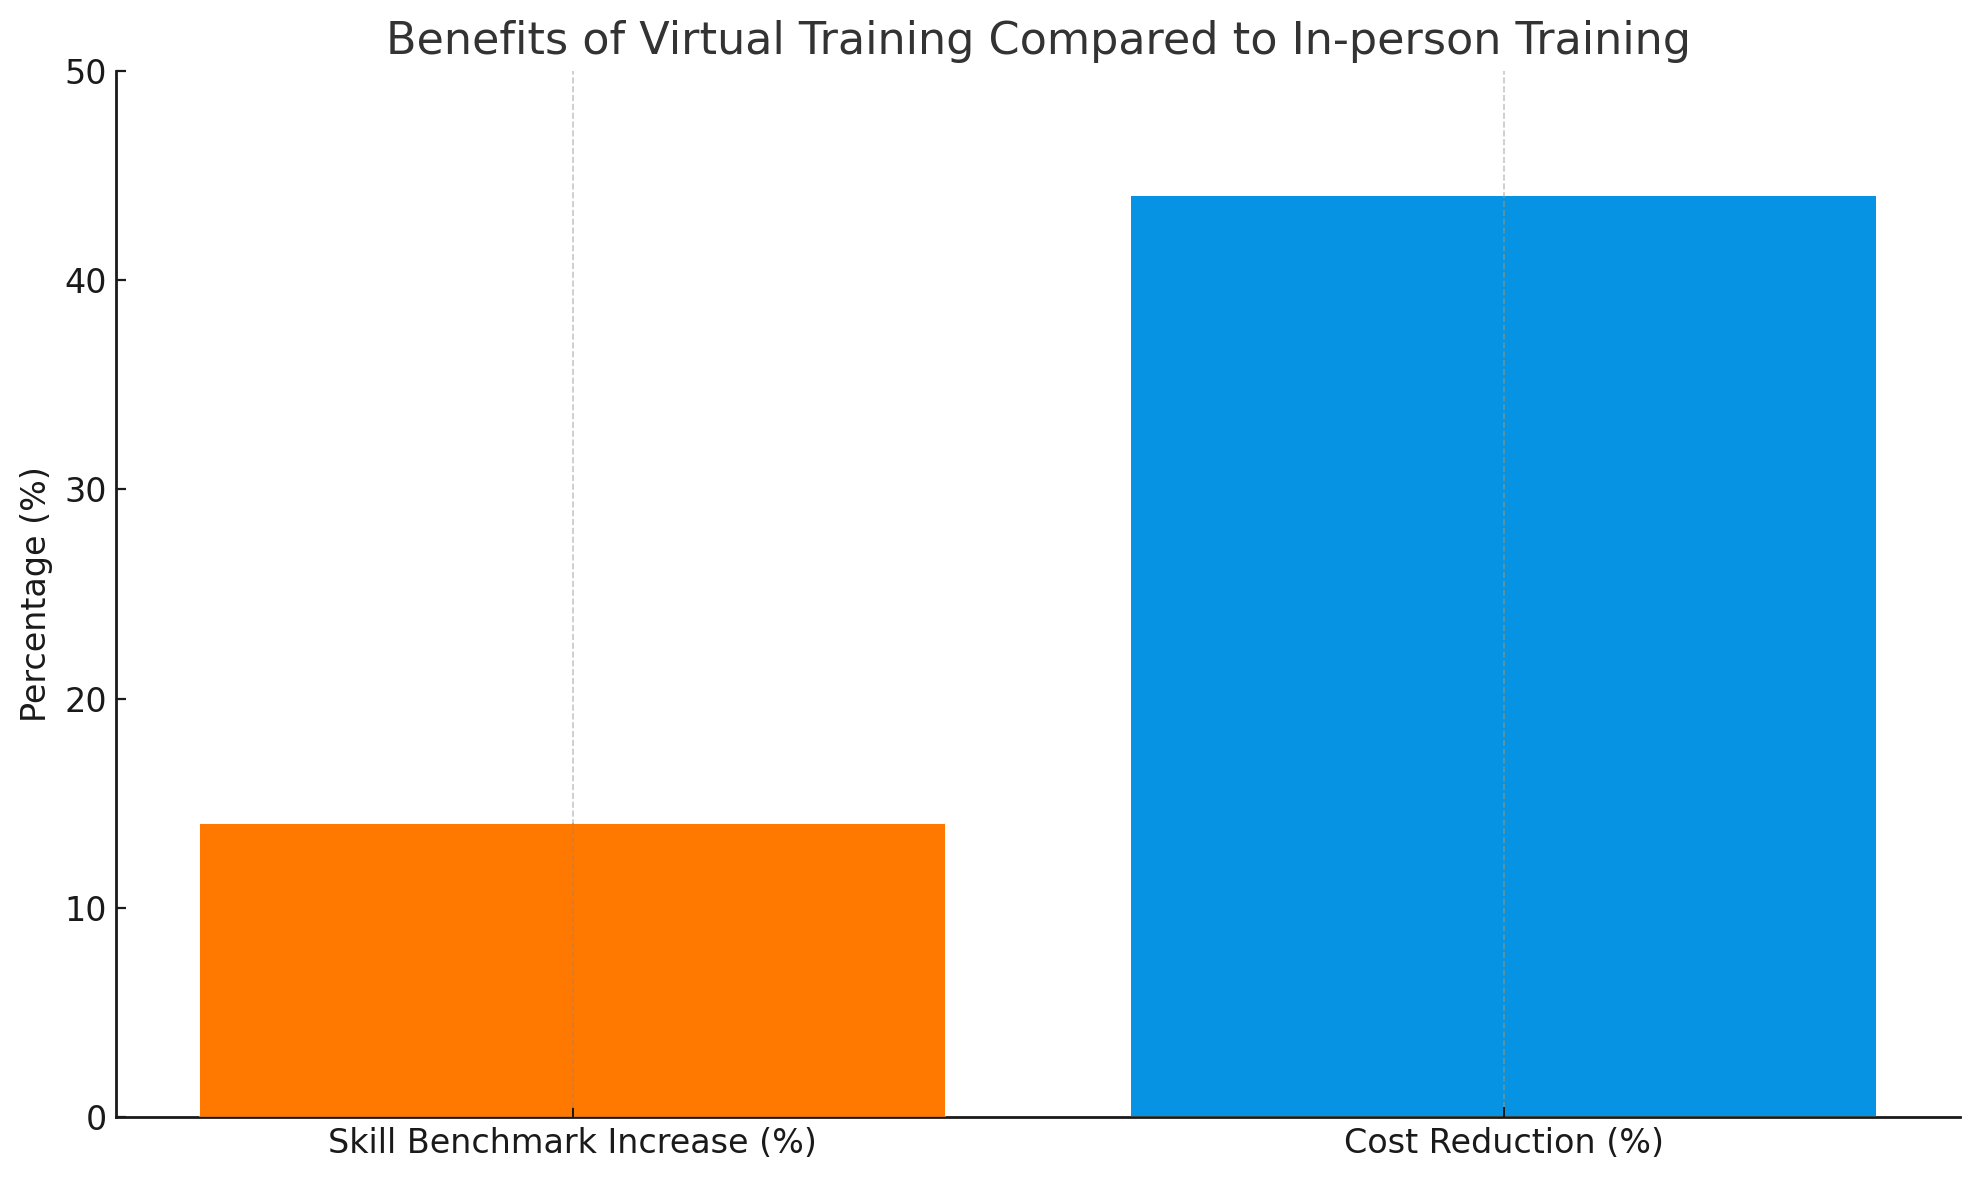 Benefits of Virtual Training Compared to In-person Training